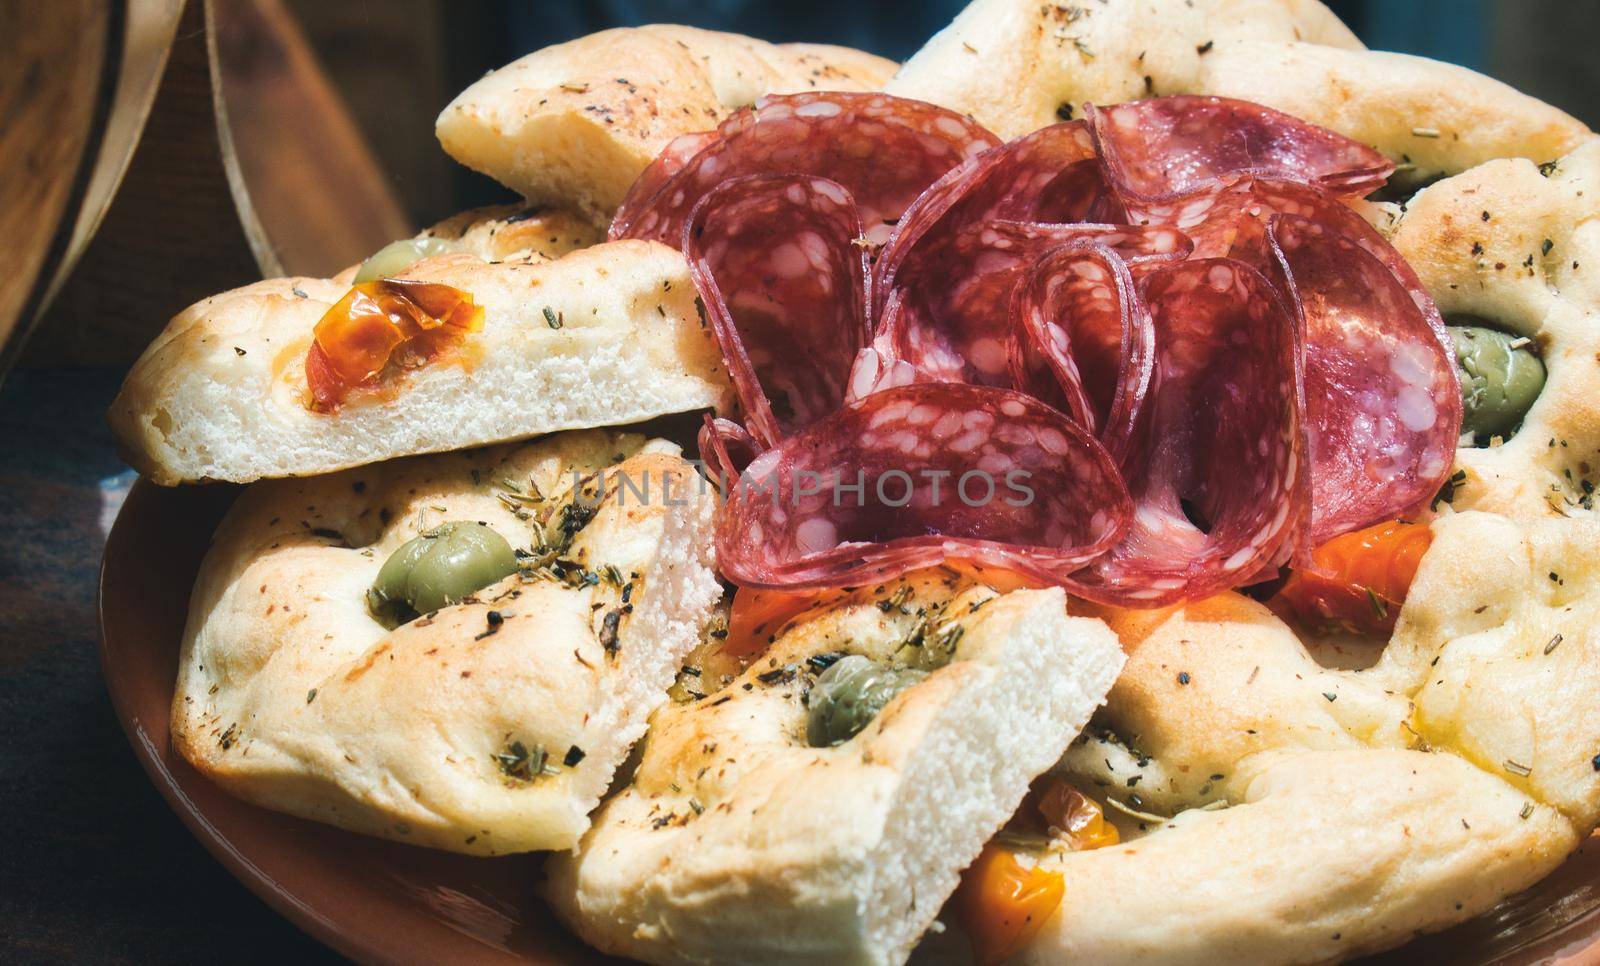 Plate of focaccia bread with slices of salami and olives